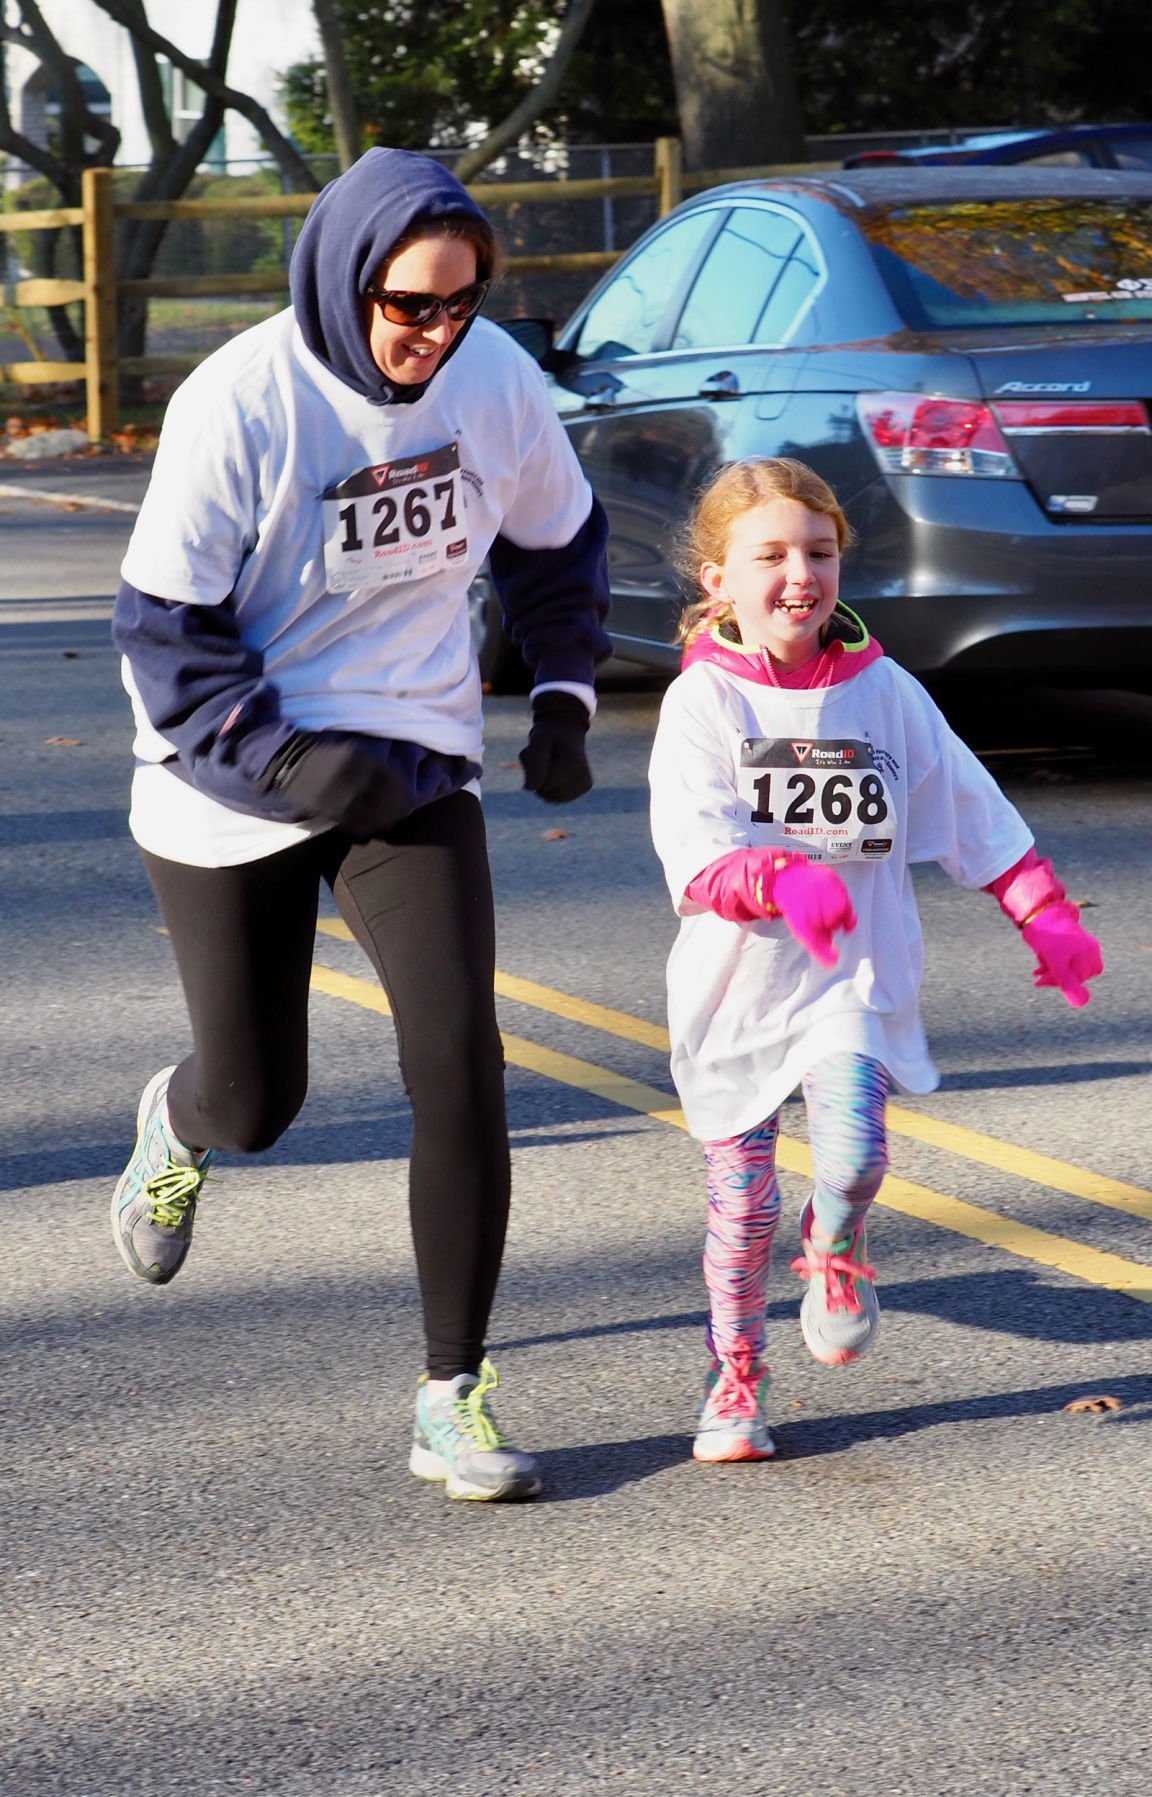 perry township turkey trot 2017 results